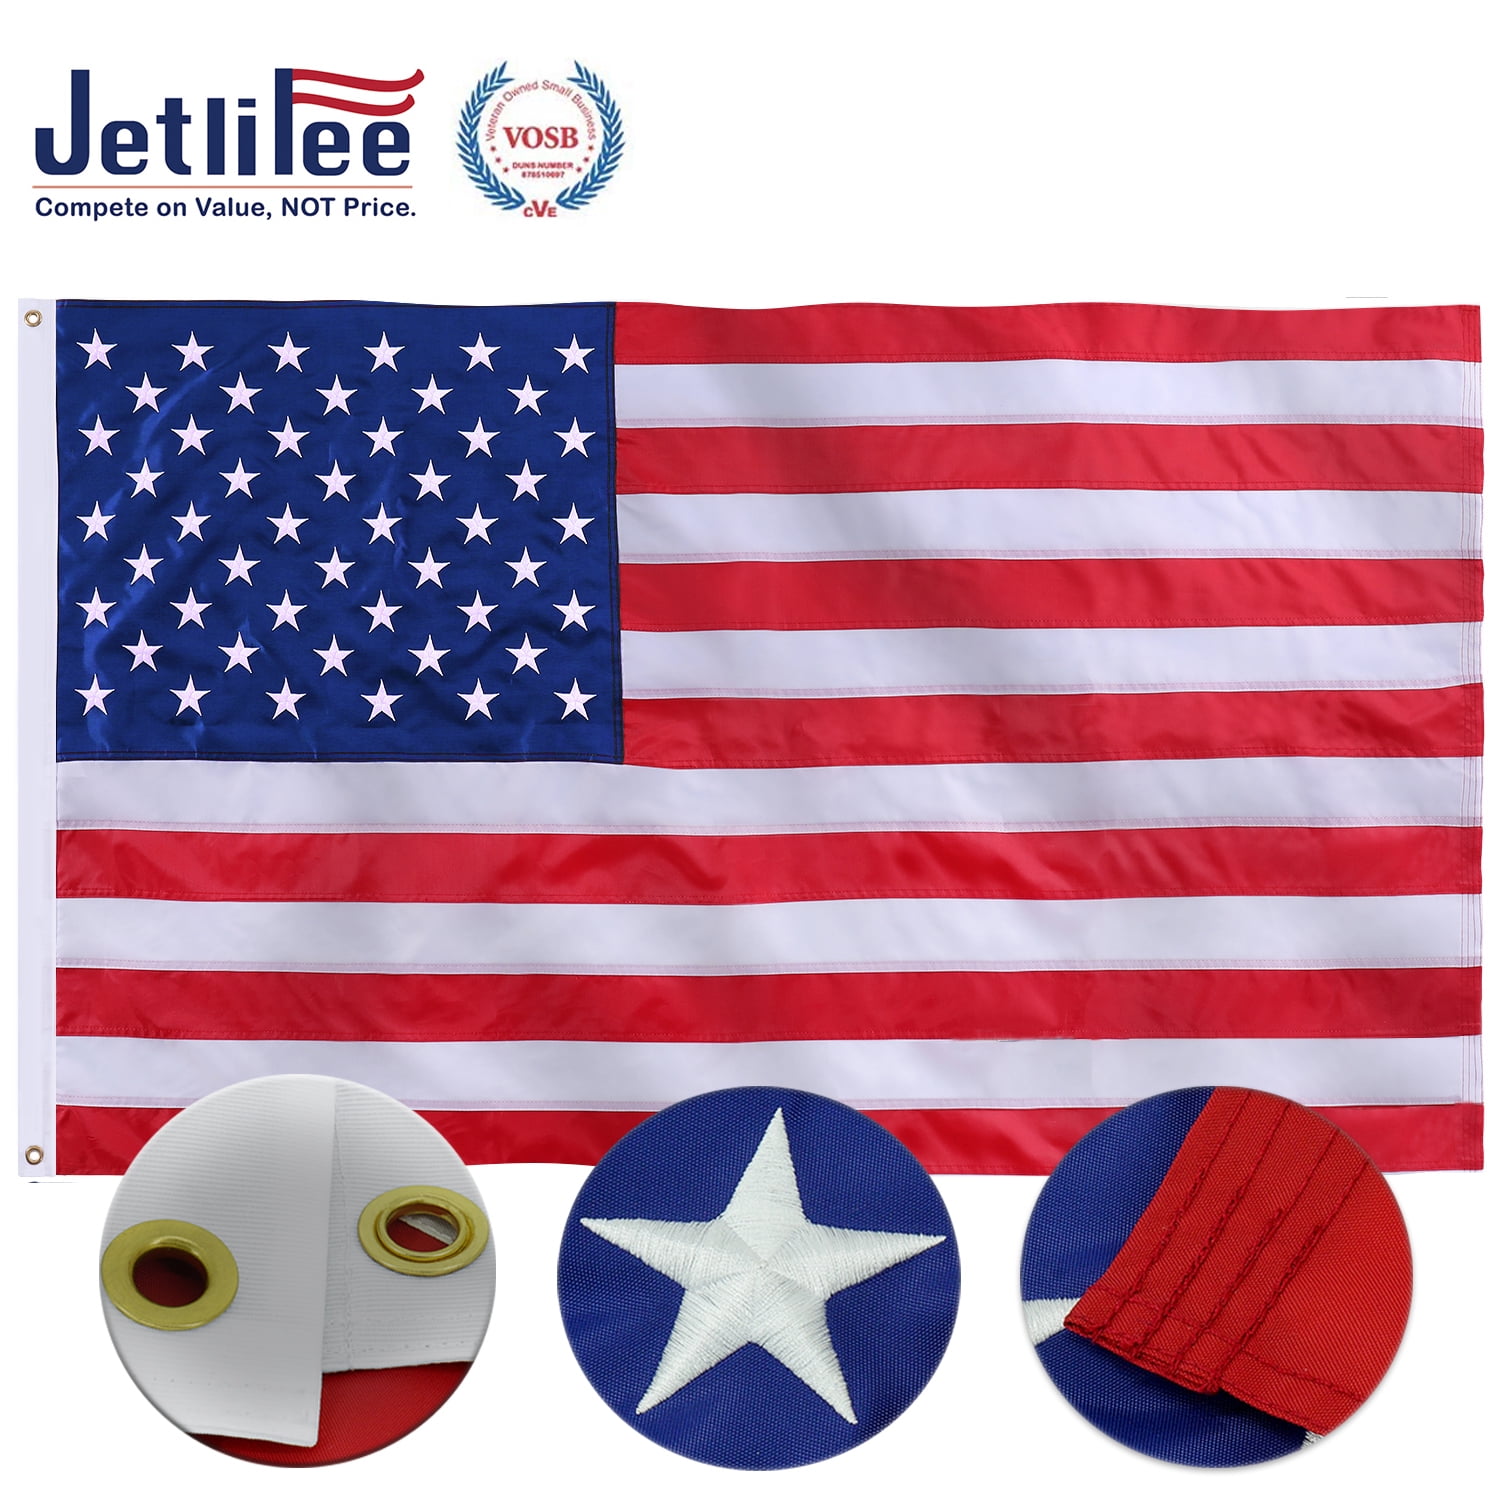 Vivid Color US Flags with Embroidered Stars Brass Grommets Jetlifee American Flag Sewn Stripes American Flags American Flag 3x5 Outdoor